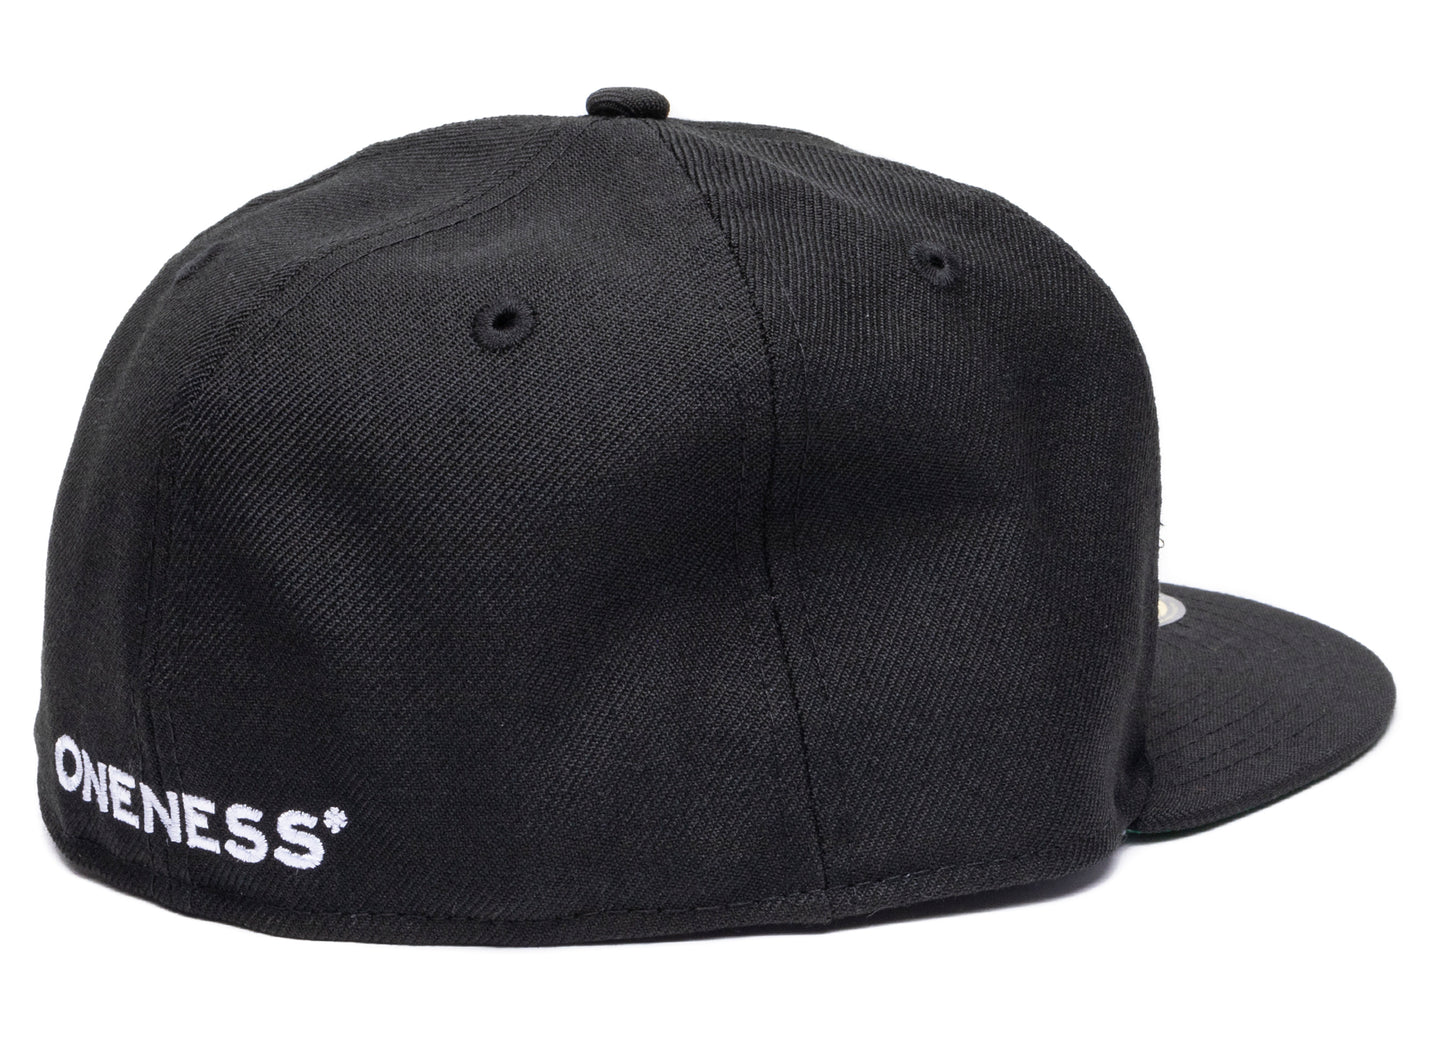 New Era x Oneness Kentucky Life Fitted Hat in Black xld